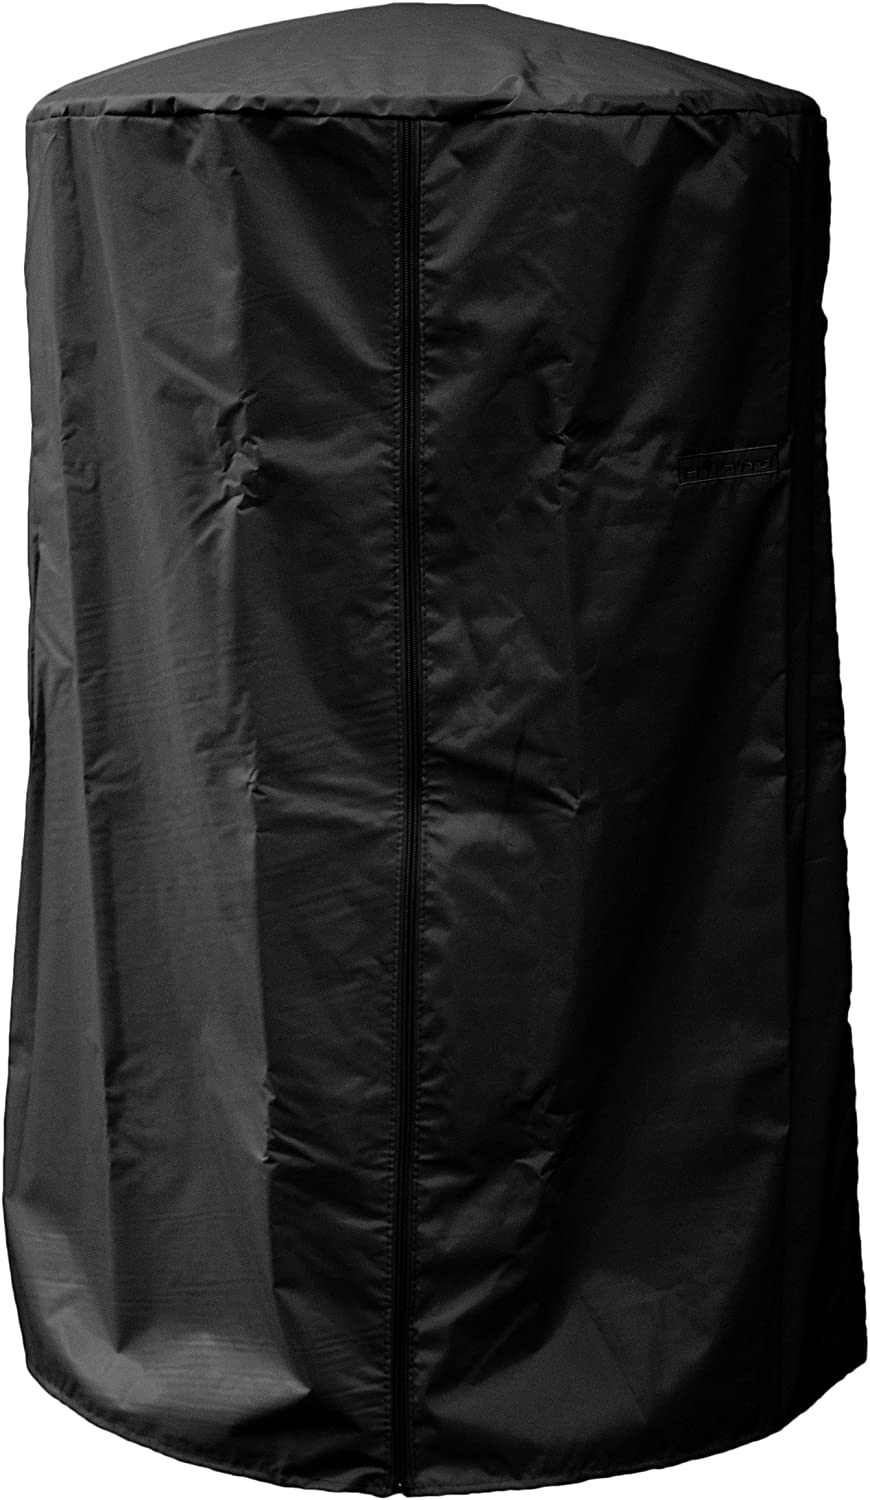 210D Standup Patio Heater Cover for Outdoor Heater Protection with Storage Bag 94x33.8x18.8in Jhua Patio Heater Covers Waterproof with Zipper Portable Outdoor Heater Cover for Patio Heater 